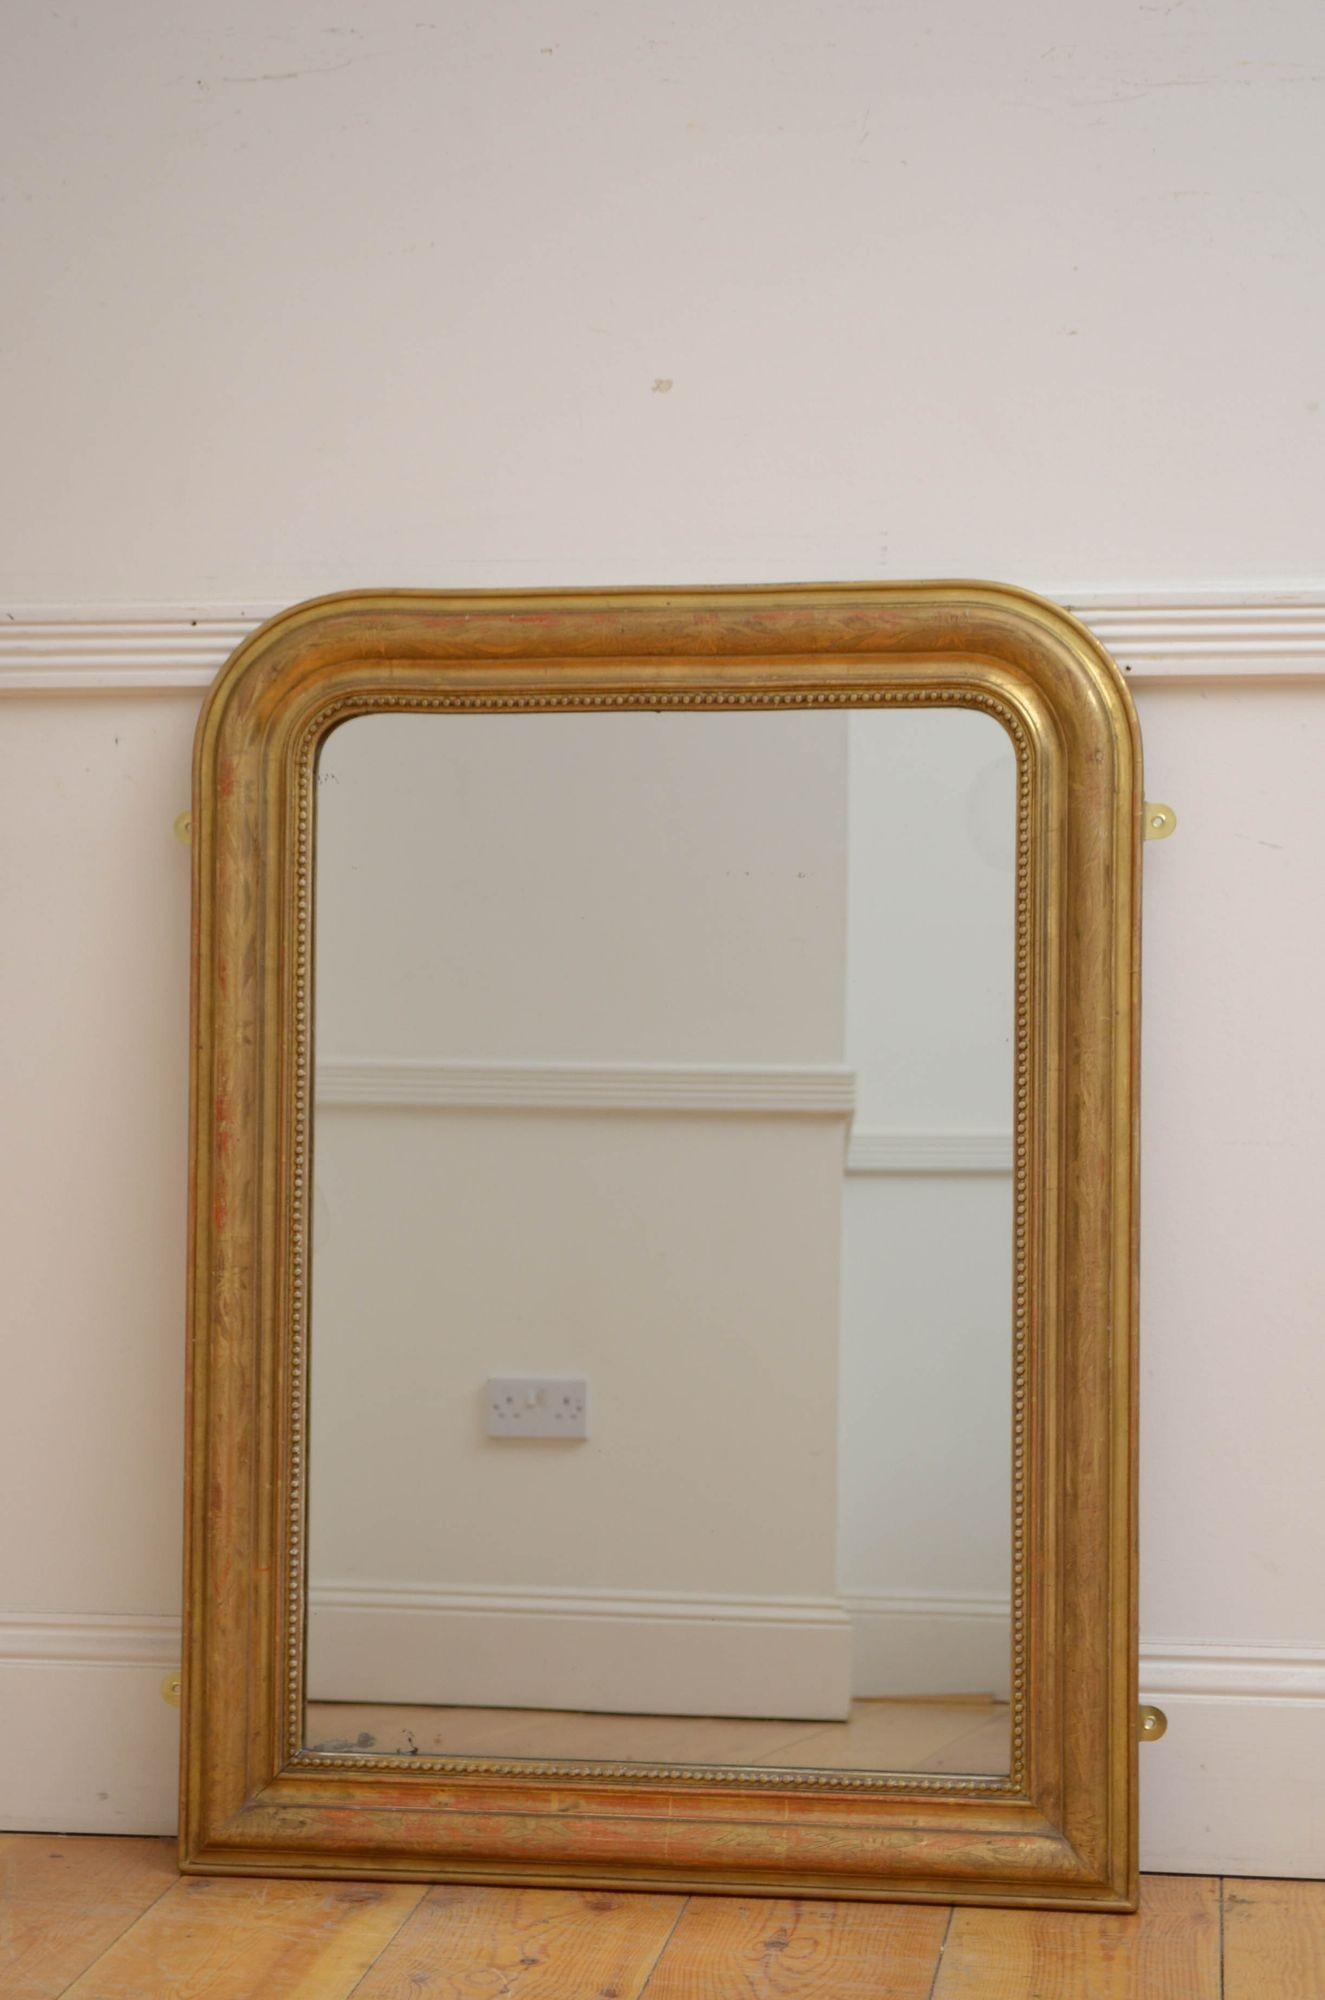 Sn5408 Attractive XIXth century gilt wall or pier mirror, having original glass with some imperfections in beaded and moulded frame with etched floral decoration. This antique mirror retains original gilt, glass and backboards, all in home ready